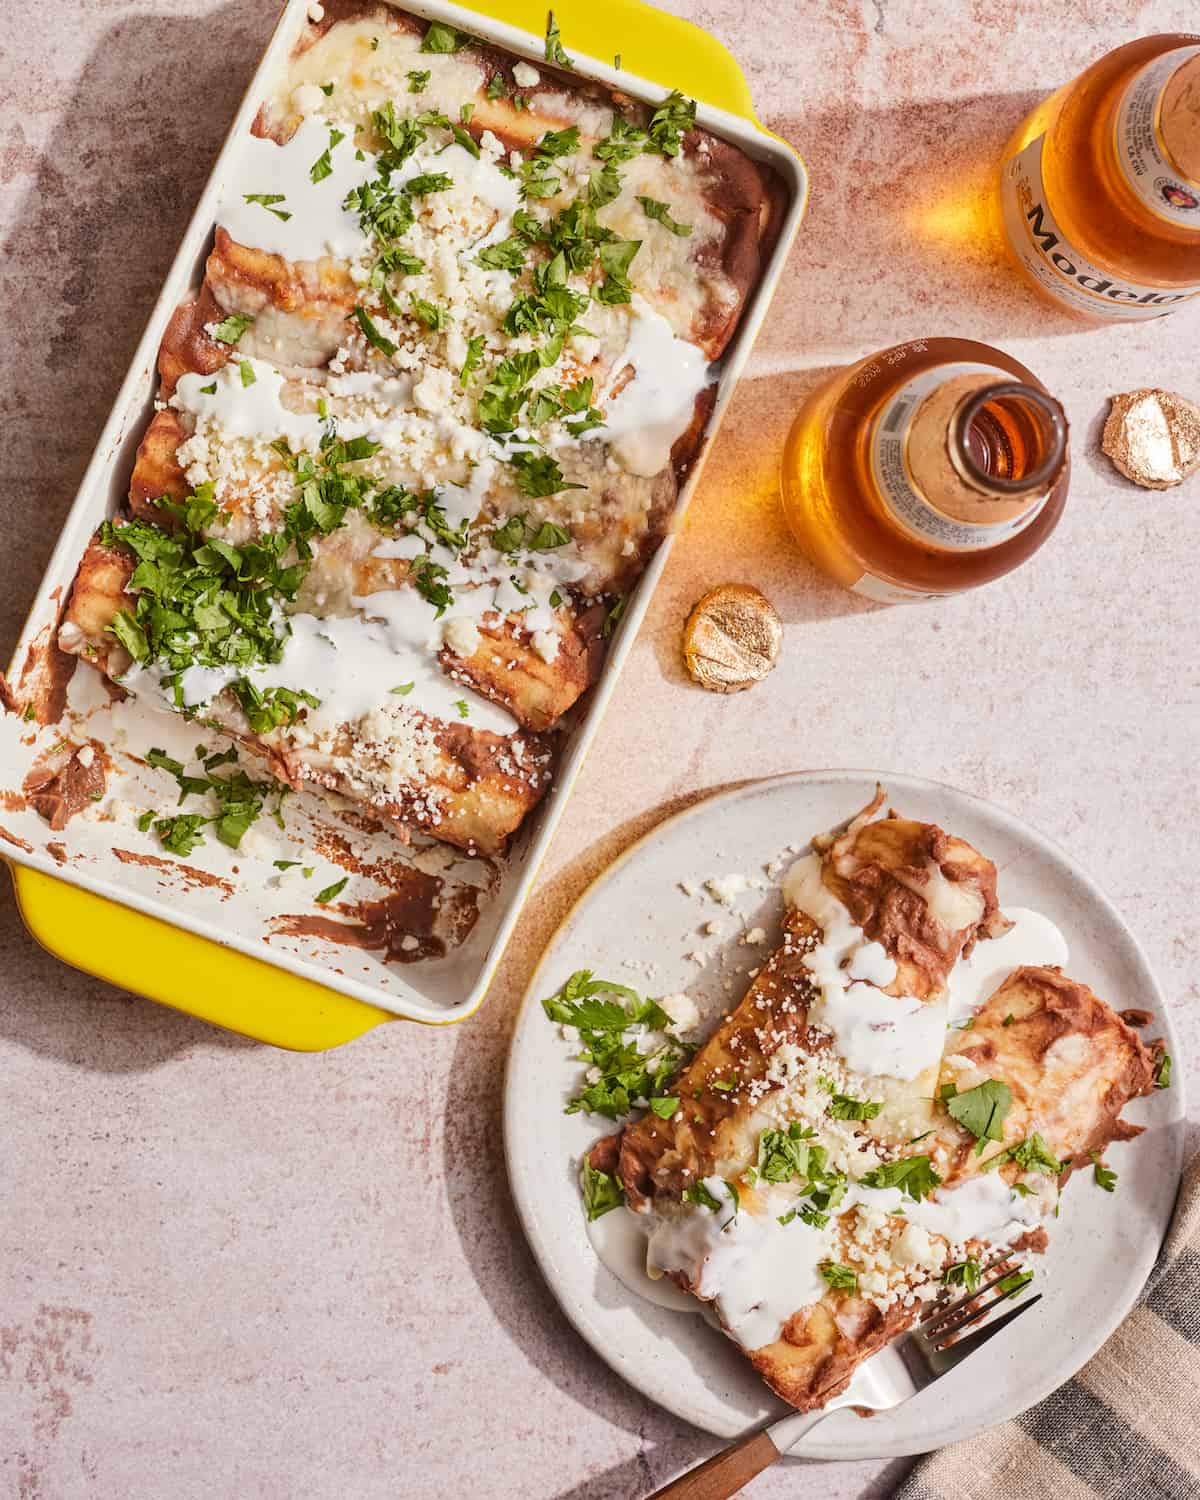 A rectangular white baking dish with black bean puree enchiladas, also called Enfrijoladas, with a plate of the same dish on the side and two modelo beer bottles.